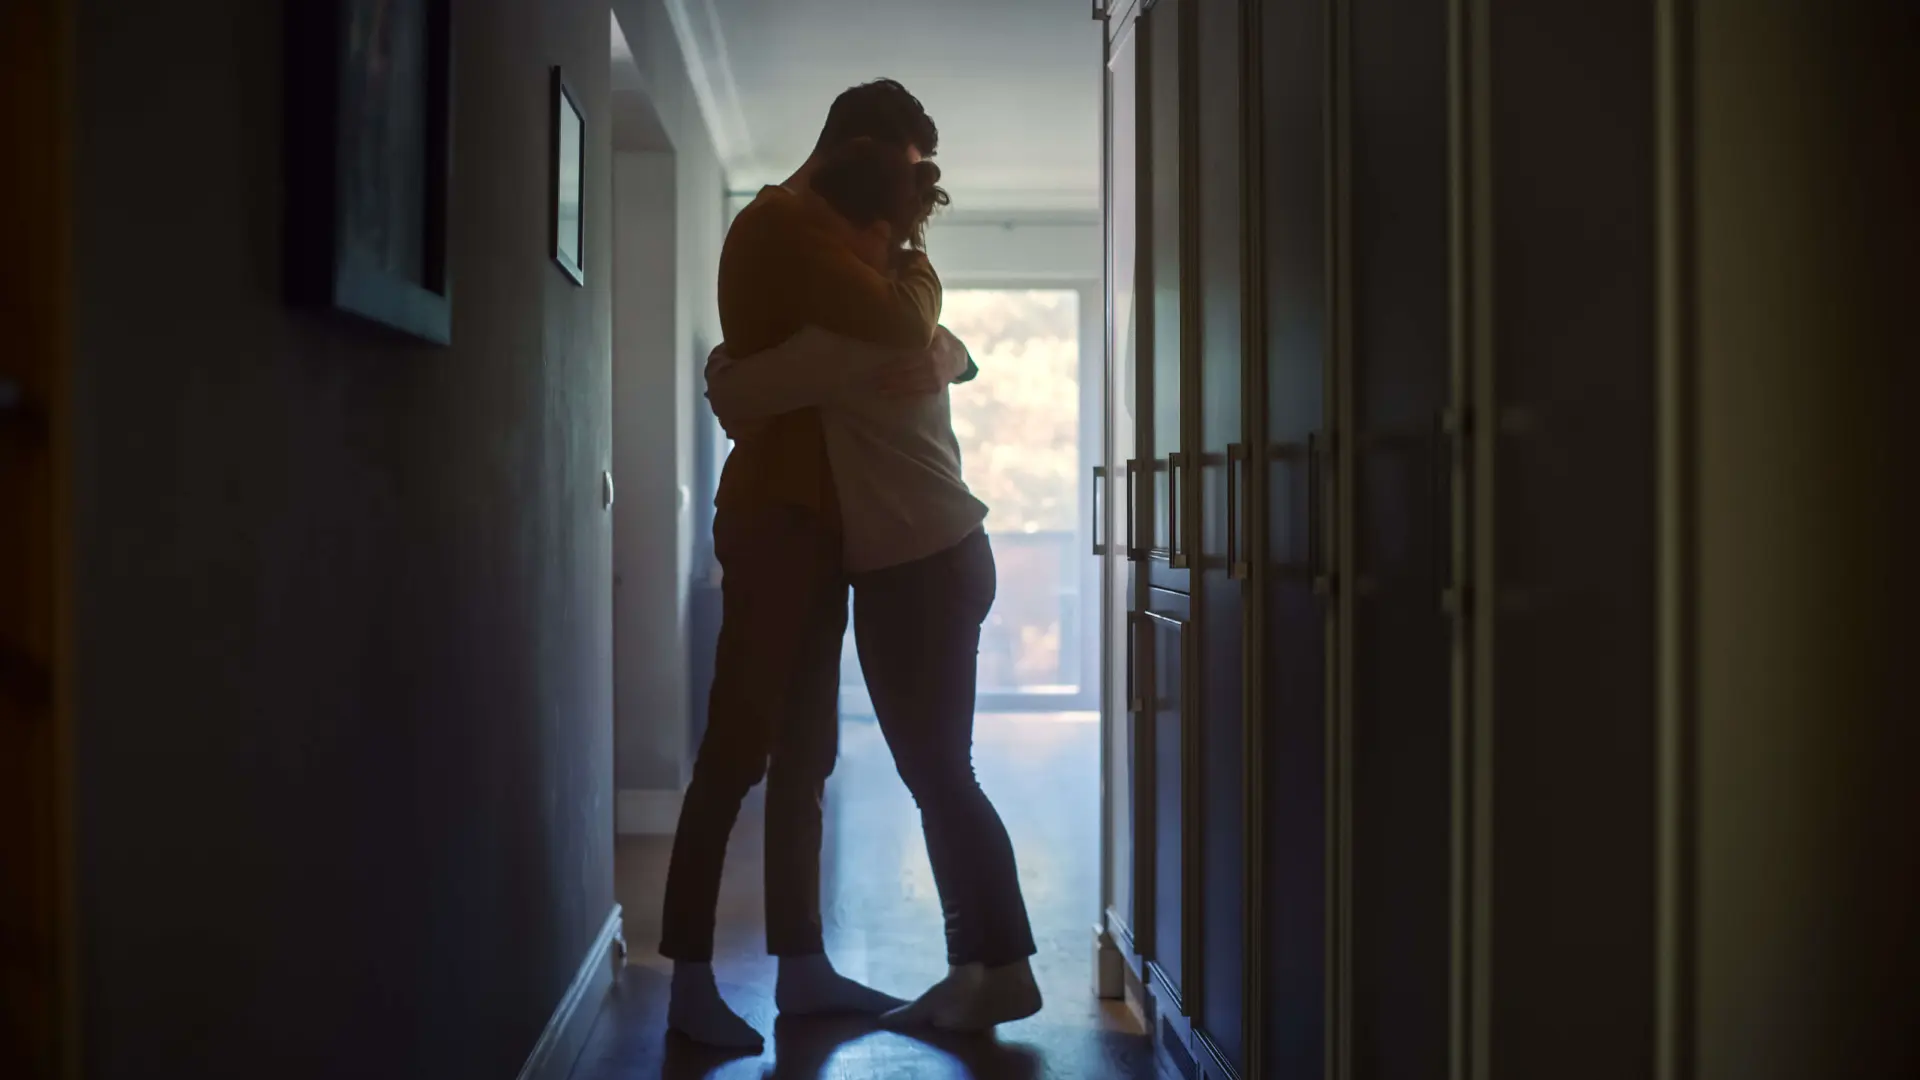 two people embrace in dark hallway as they contemplate what their options are after someone they loved suffered a wrongful death